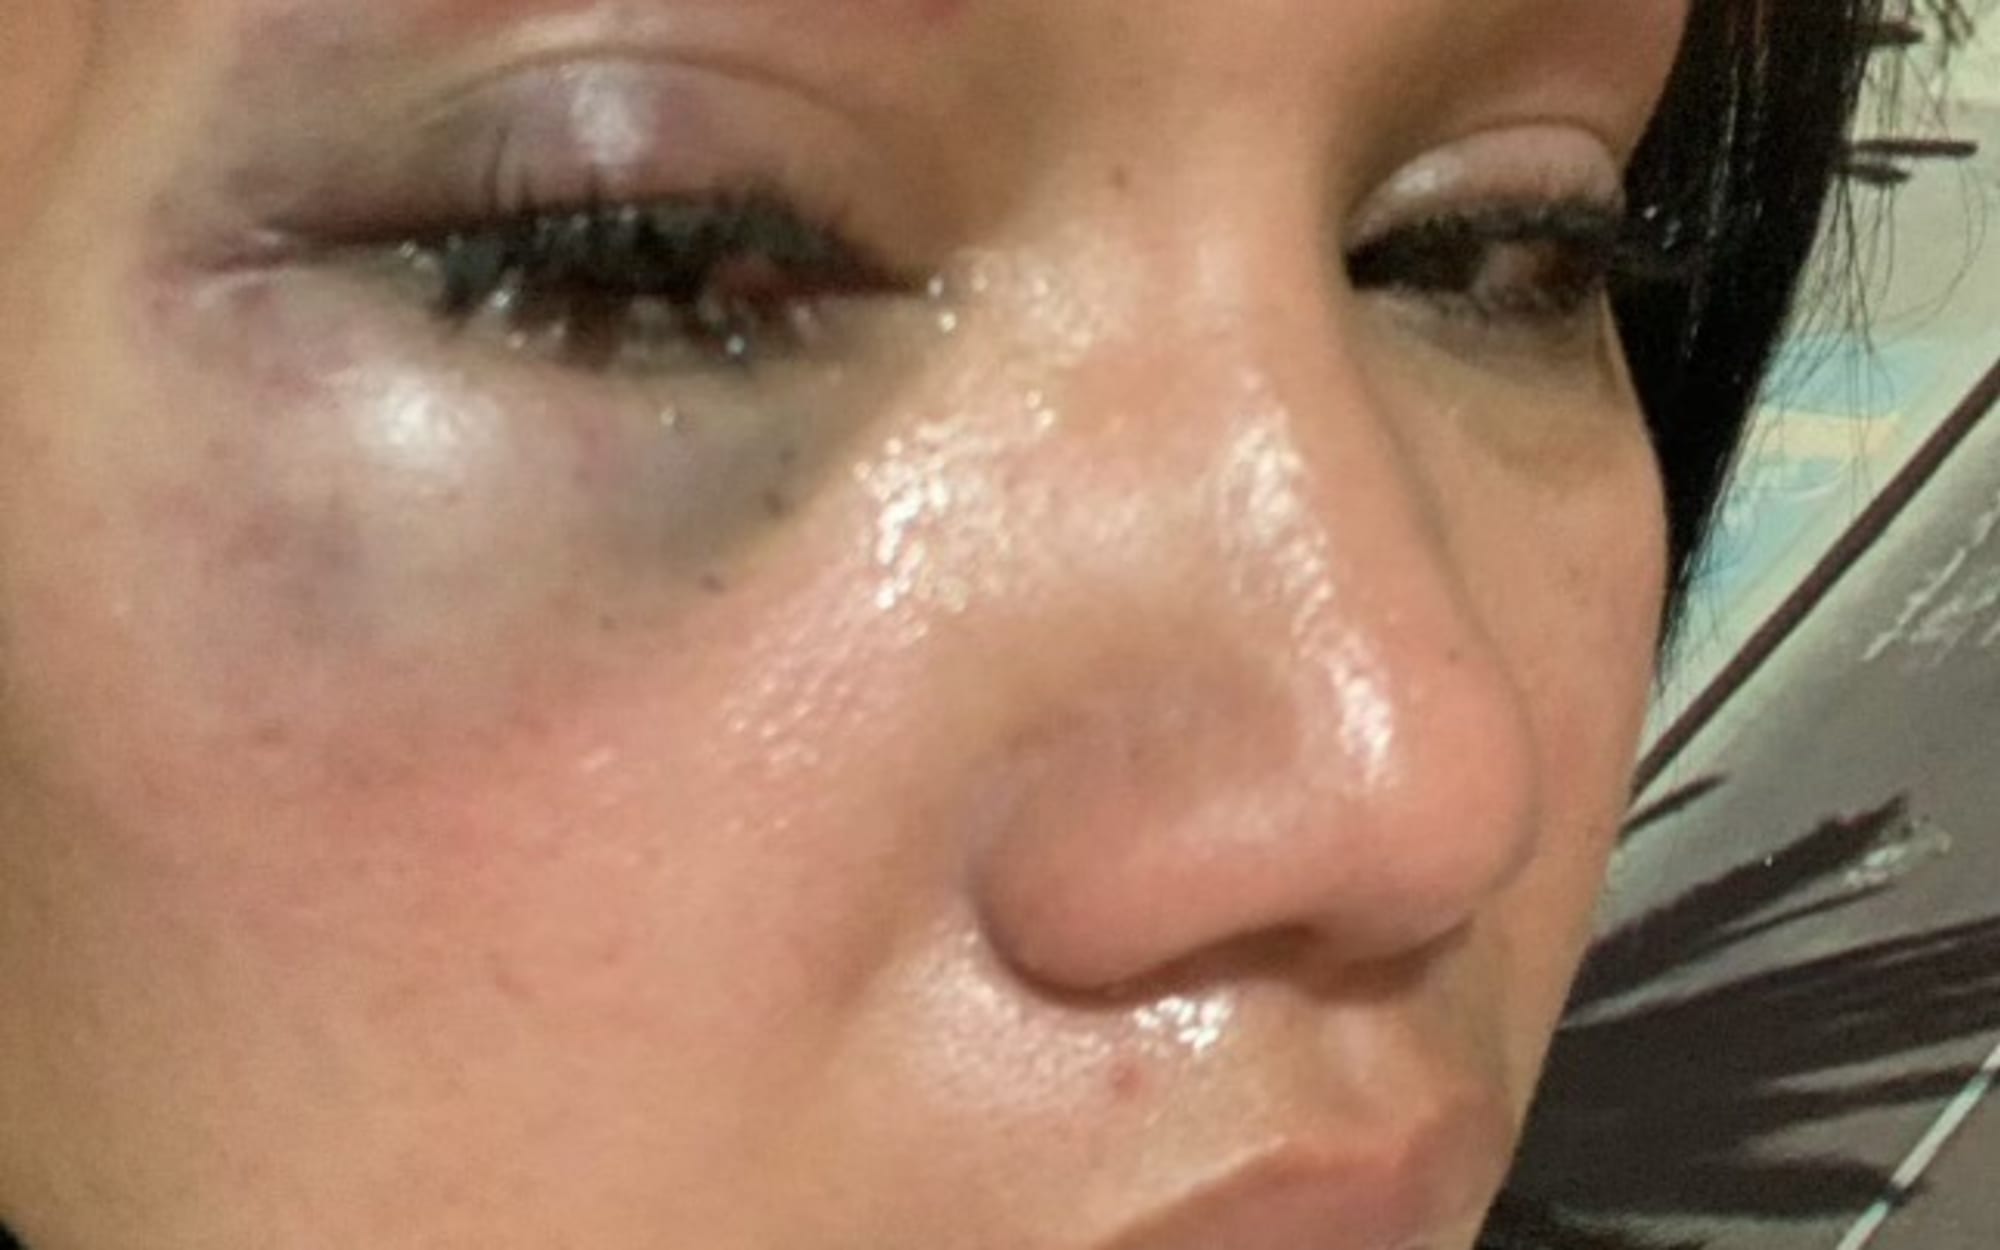 Injuries Yuliana Desta says were caused by her former partner, ex-All Black Byron Kelleher, in an assault she alleges happened in a Barcelona hotel in 2019.